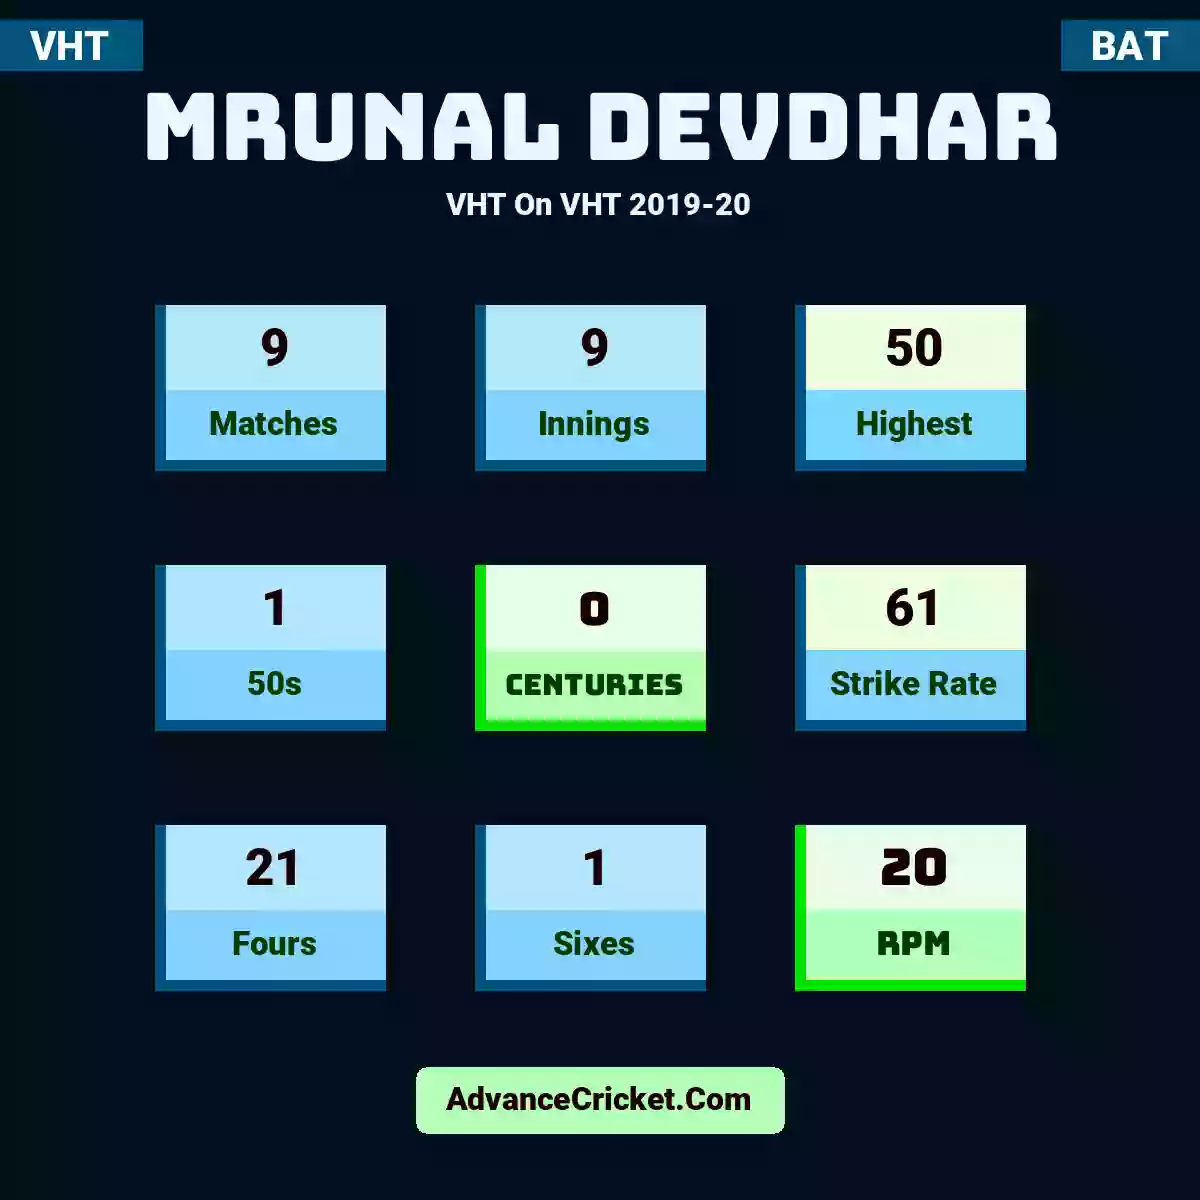 Mrunal Devdhar VHT  On VHT 2019-20, Mrunal Devdhar played 9 matches, scored 50 runs as highest, 1 half-centuries, and 0 centuries, with a strike rate of 61. M.Devdhar hit 21 fours and 1 sixes, with an RPM of 20.